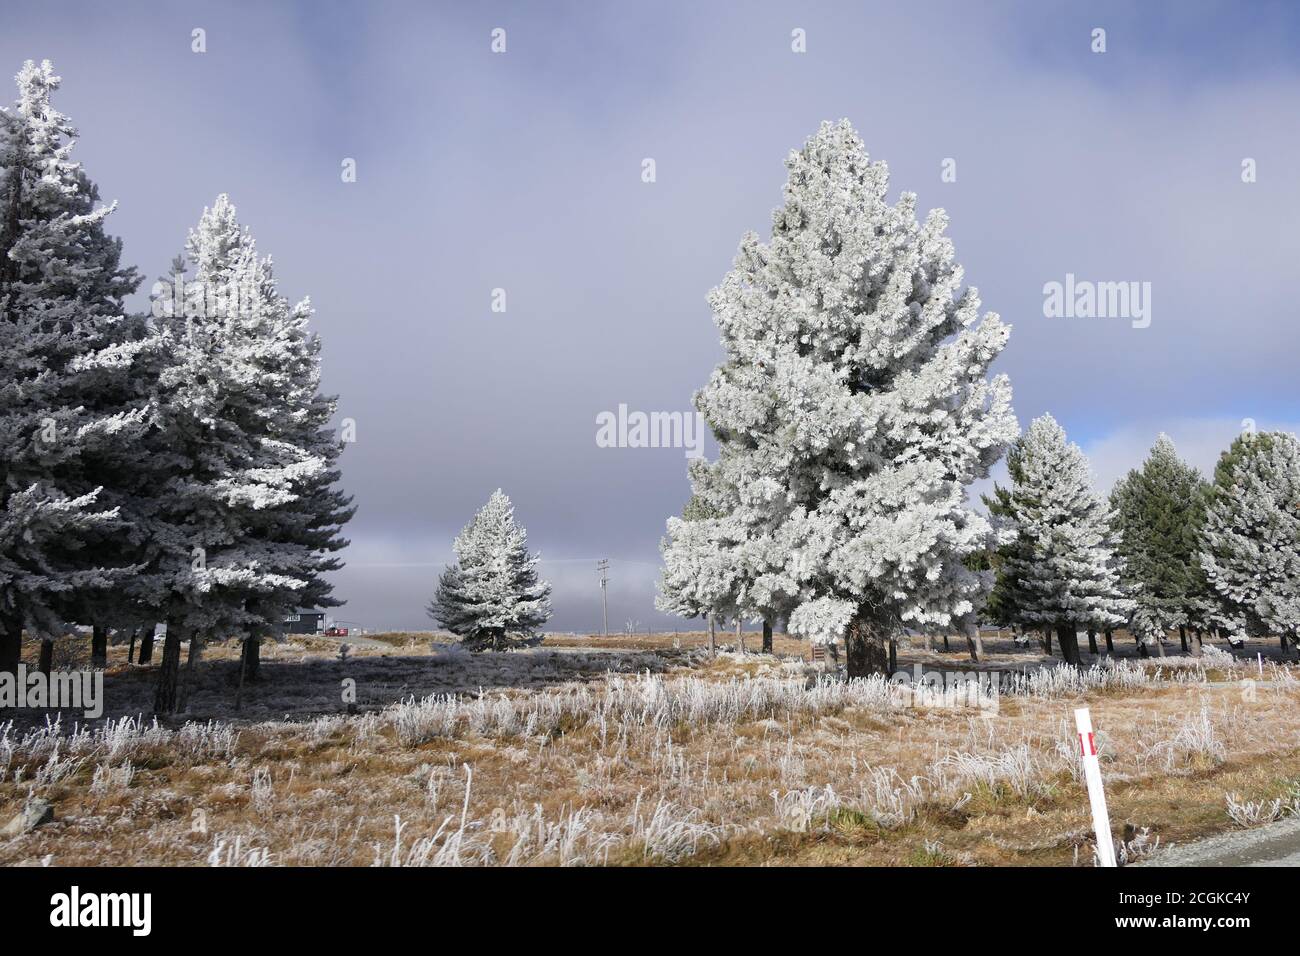 New Zealand winter - snowy trees in a magical light Stock Photo